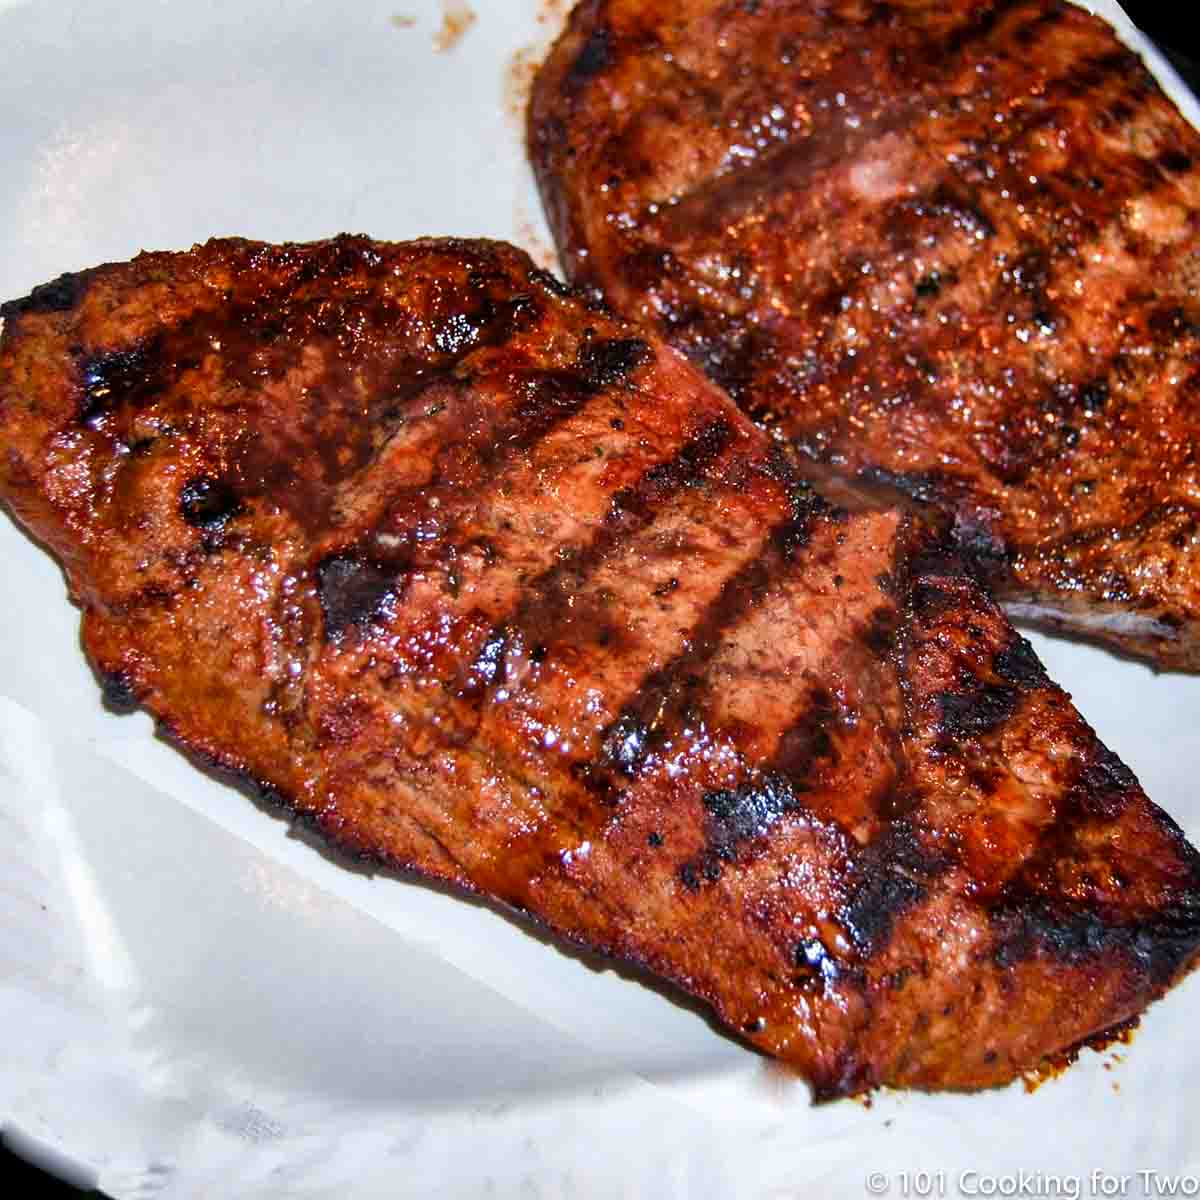 Grilled marinated sirloin steak on a white plate.